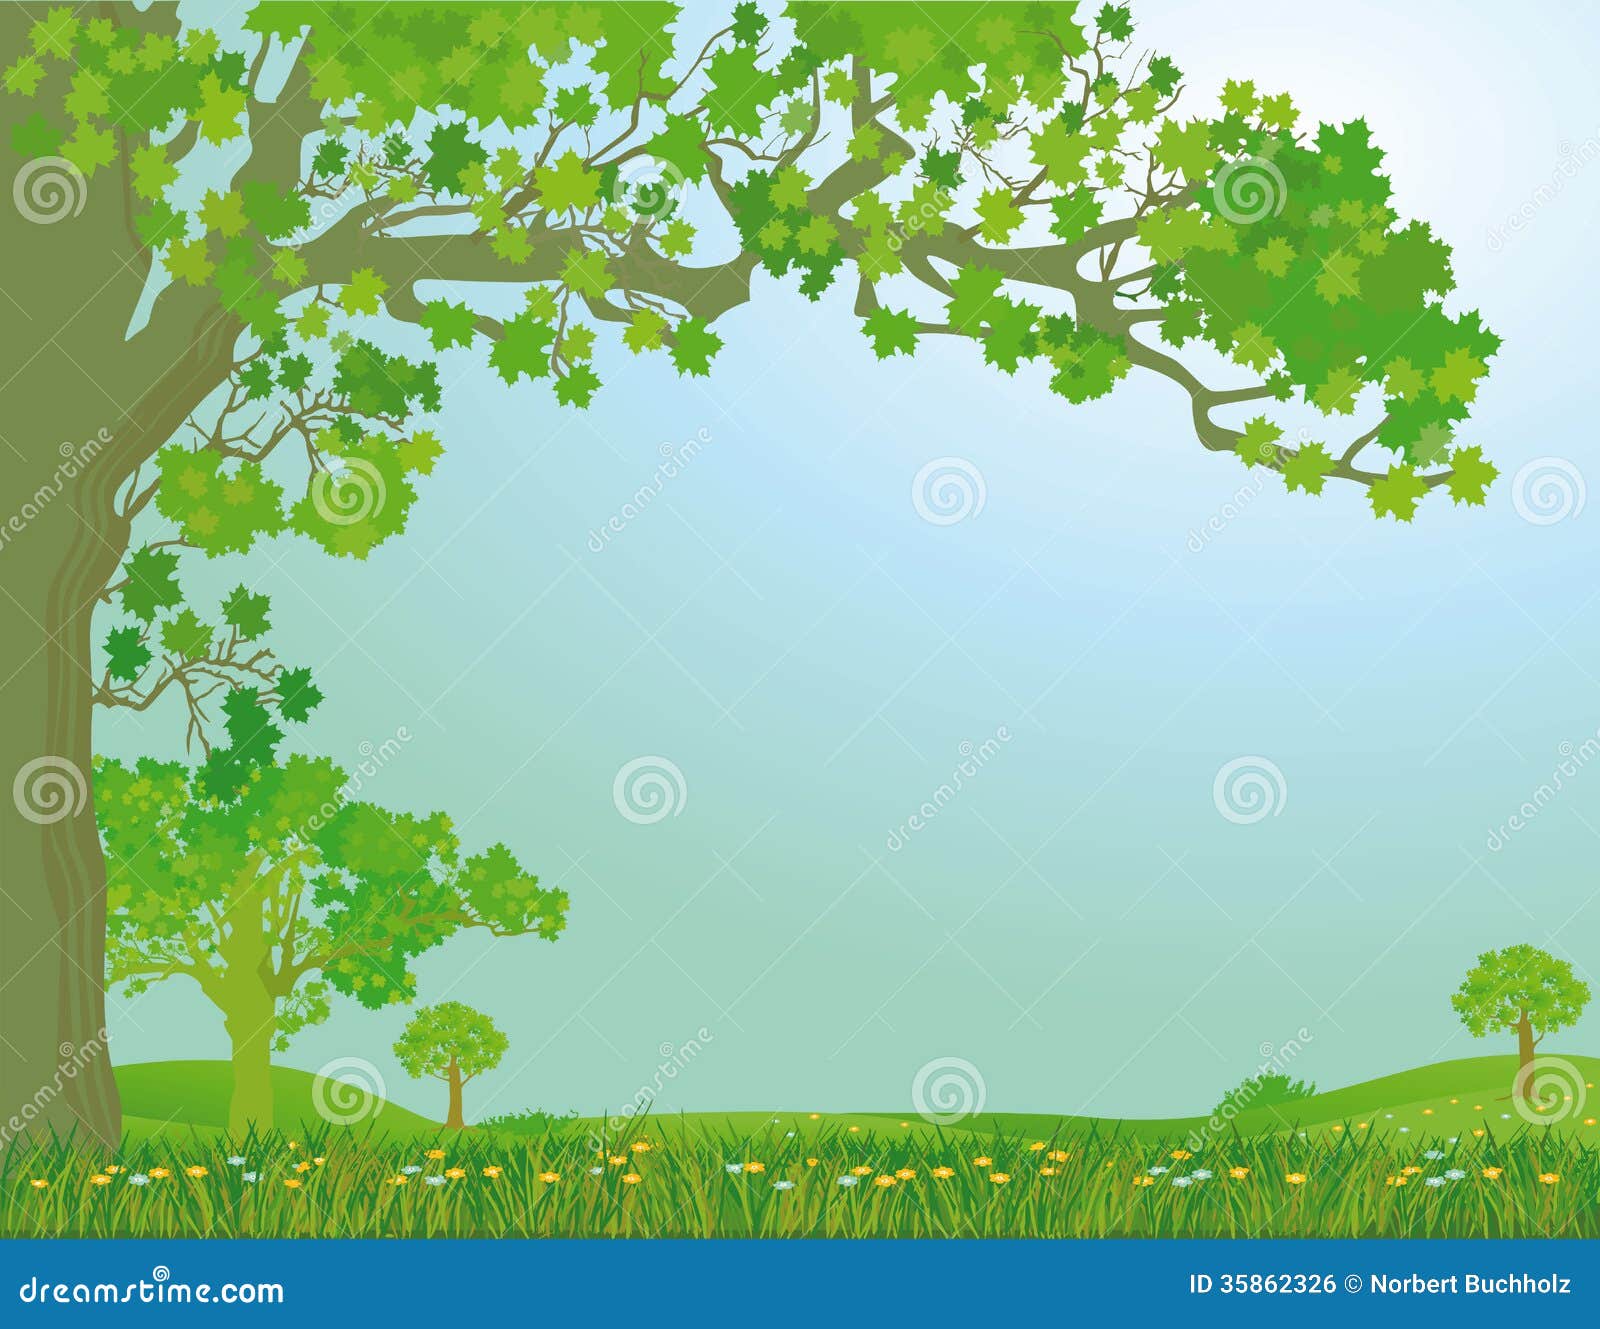 clipart meadow flowers - photo #20